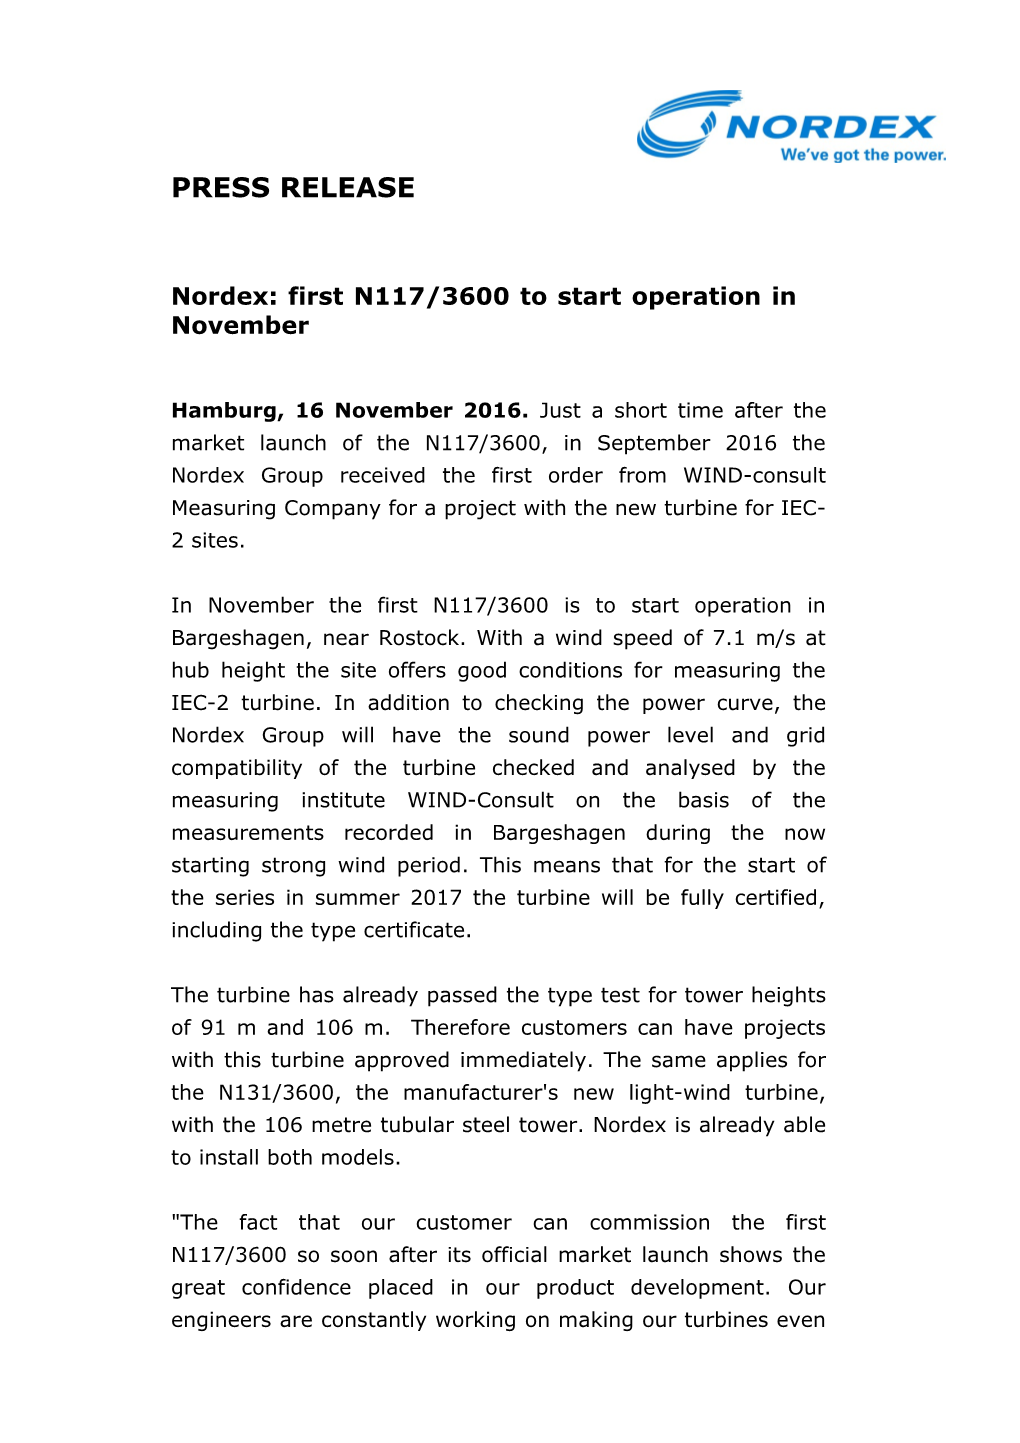 Nordex: First N117/3600 to Start Operation in November